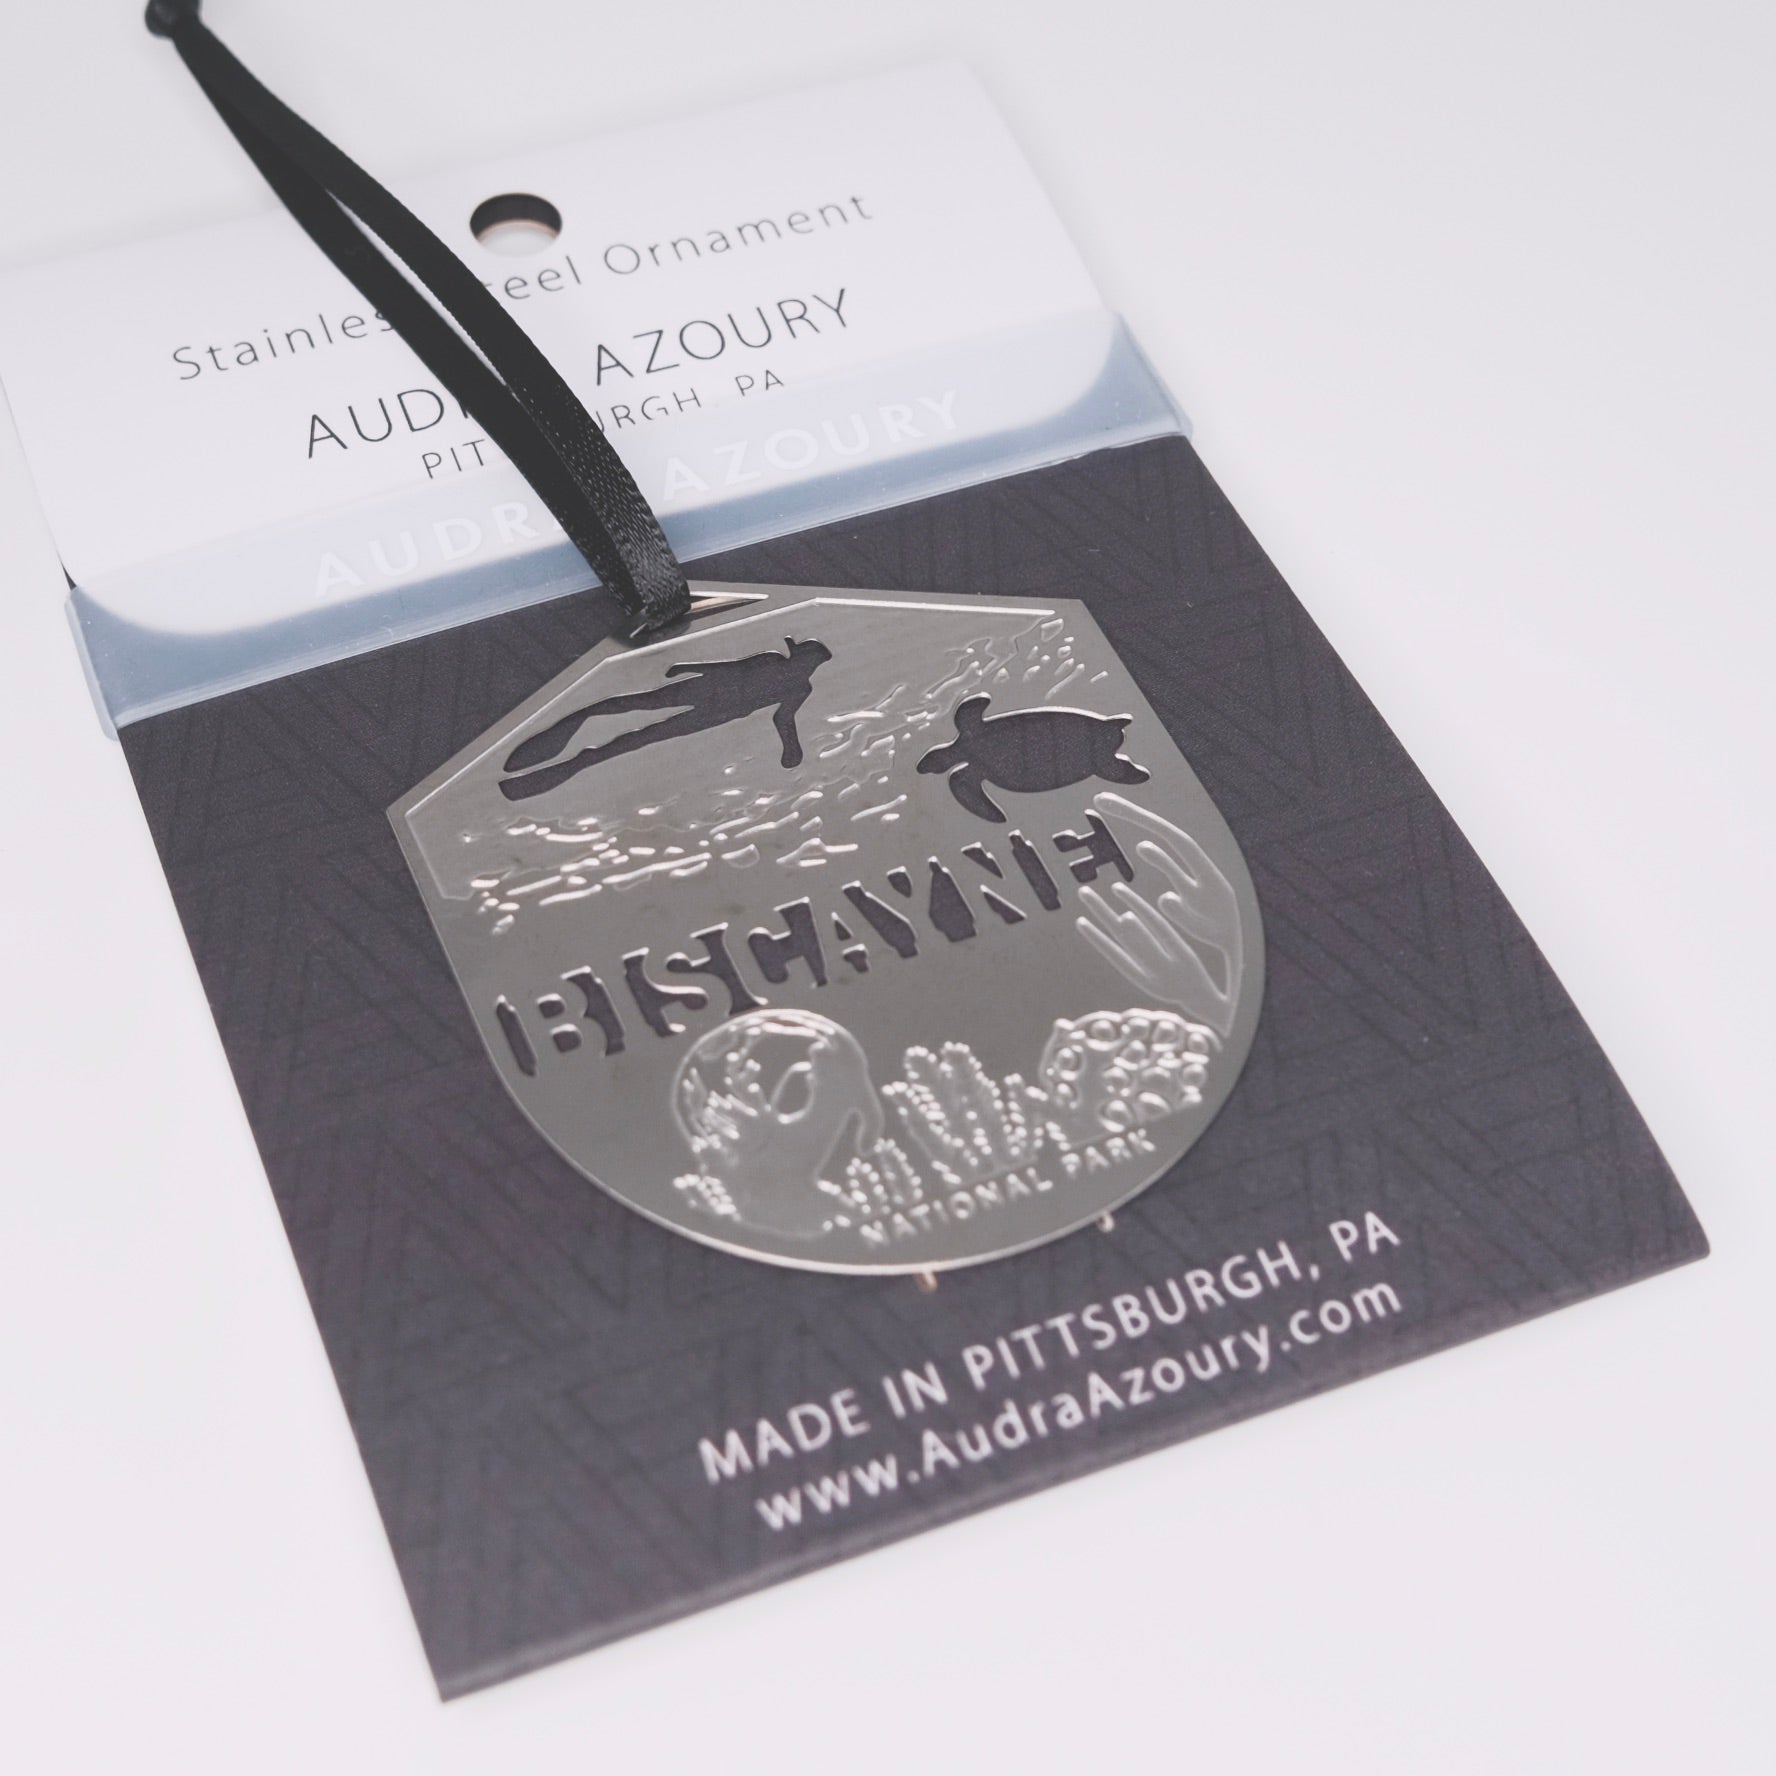 Biscayne National Park ornament in stainless steel by Audra Azoury